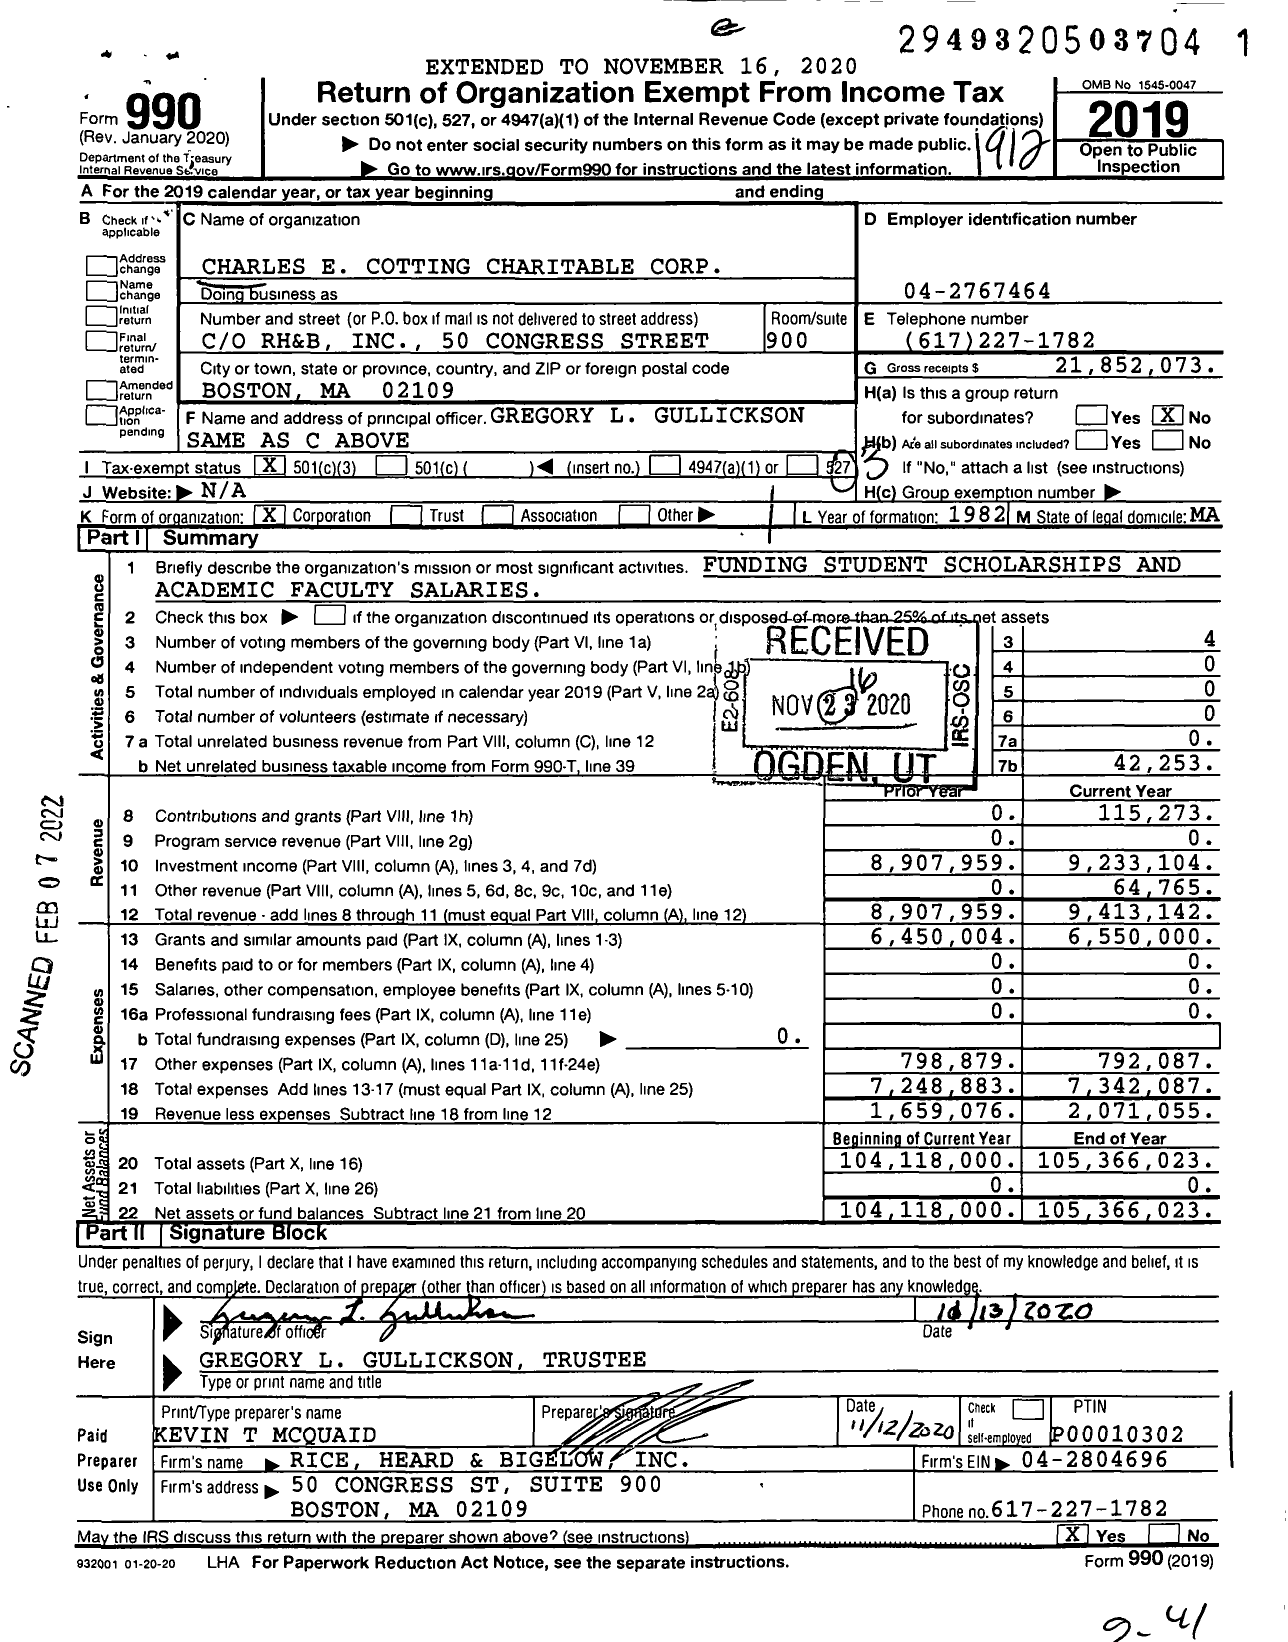 Image of first page of 2019 Form 990 for Charles E. Cotting Charitable Corporation